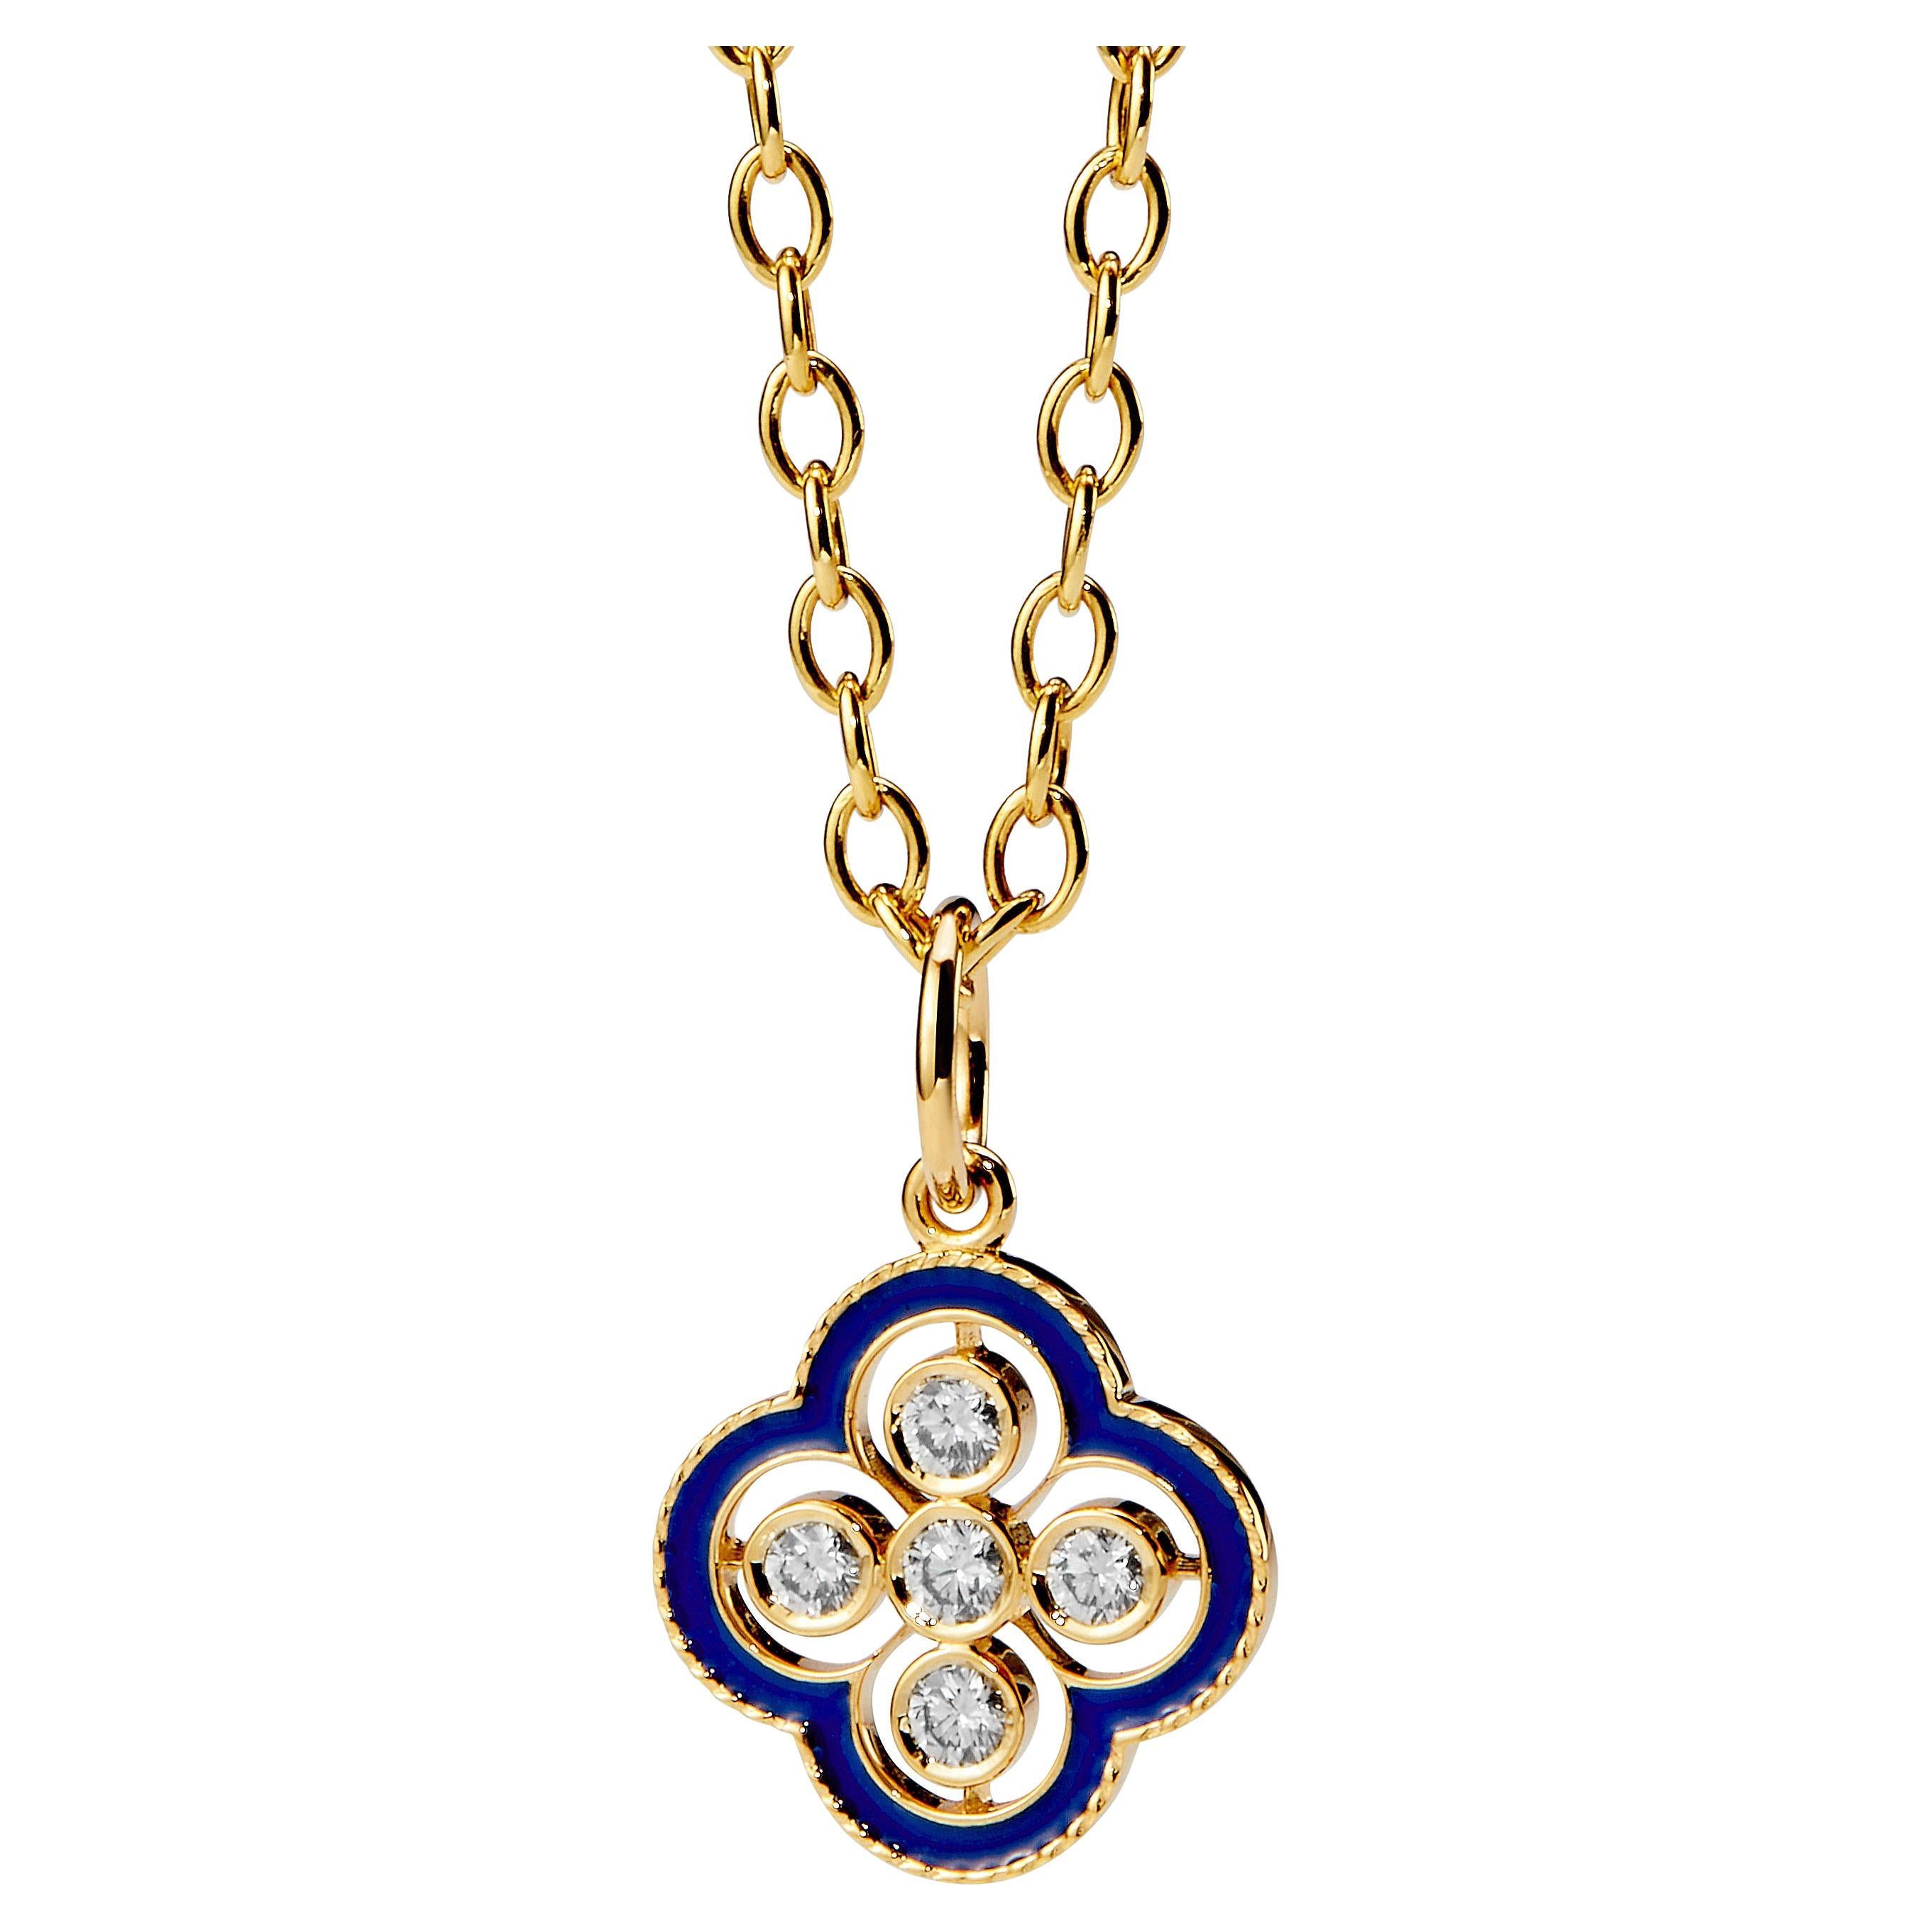 Syna Yellow Gold Clover Pendant with Lapis Blue Enamel and Diamonds